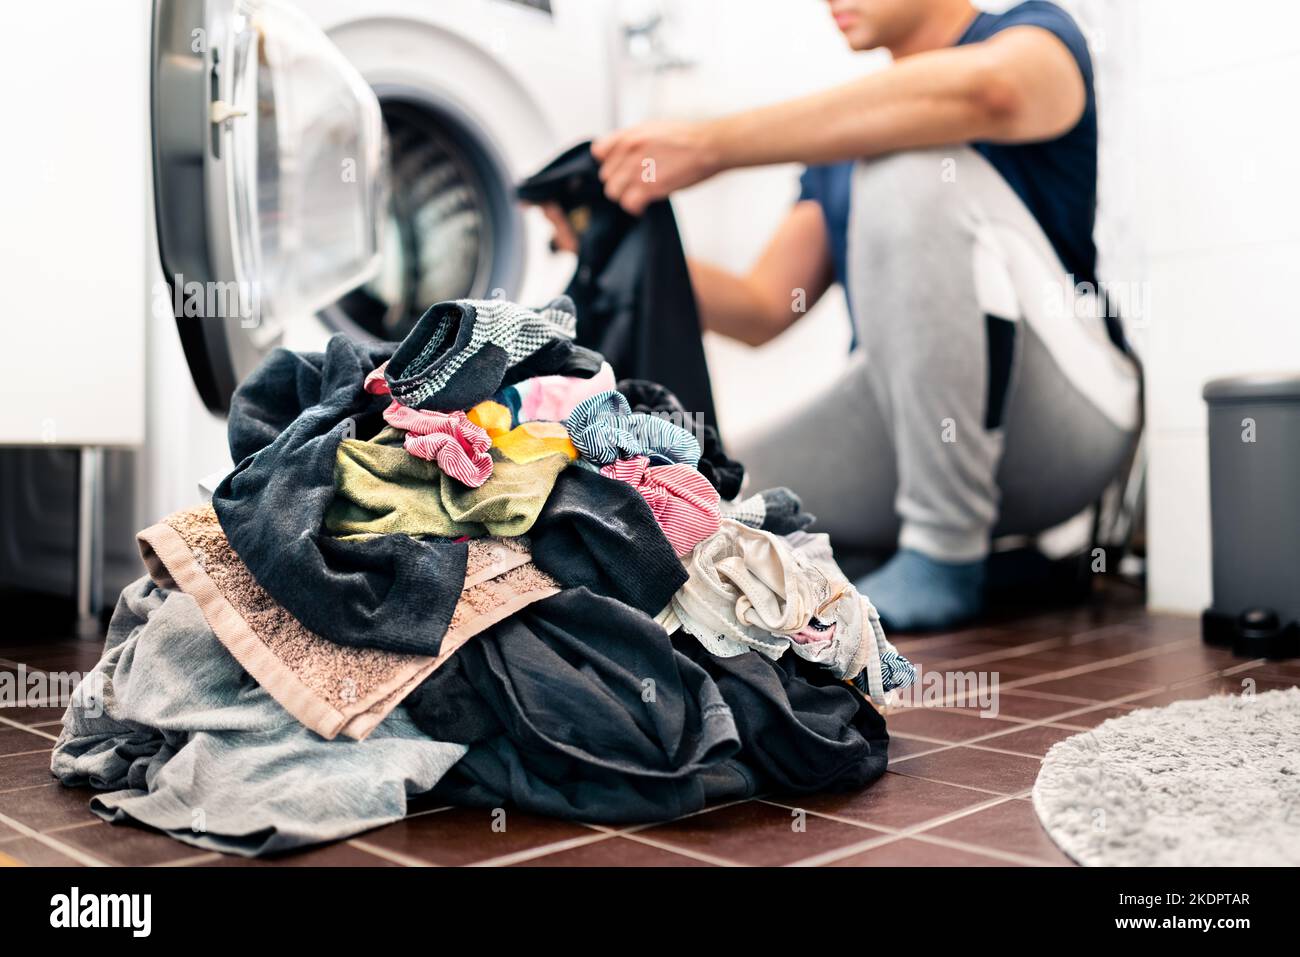 Laundry, washing clothes. Man loading washer machine and sorting by color and fabric.  Male homemaker doing house chores. Domestic work in family. Stock Photo